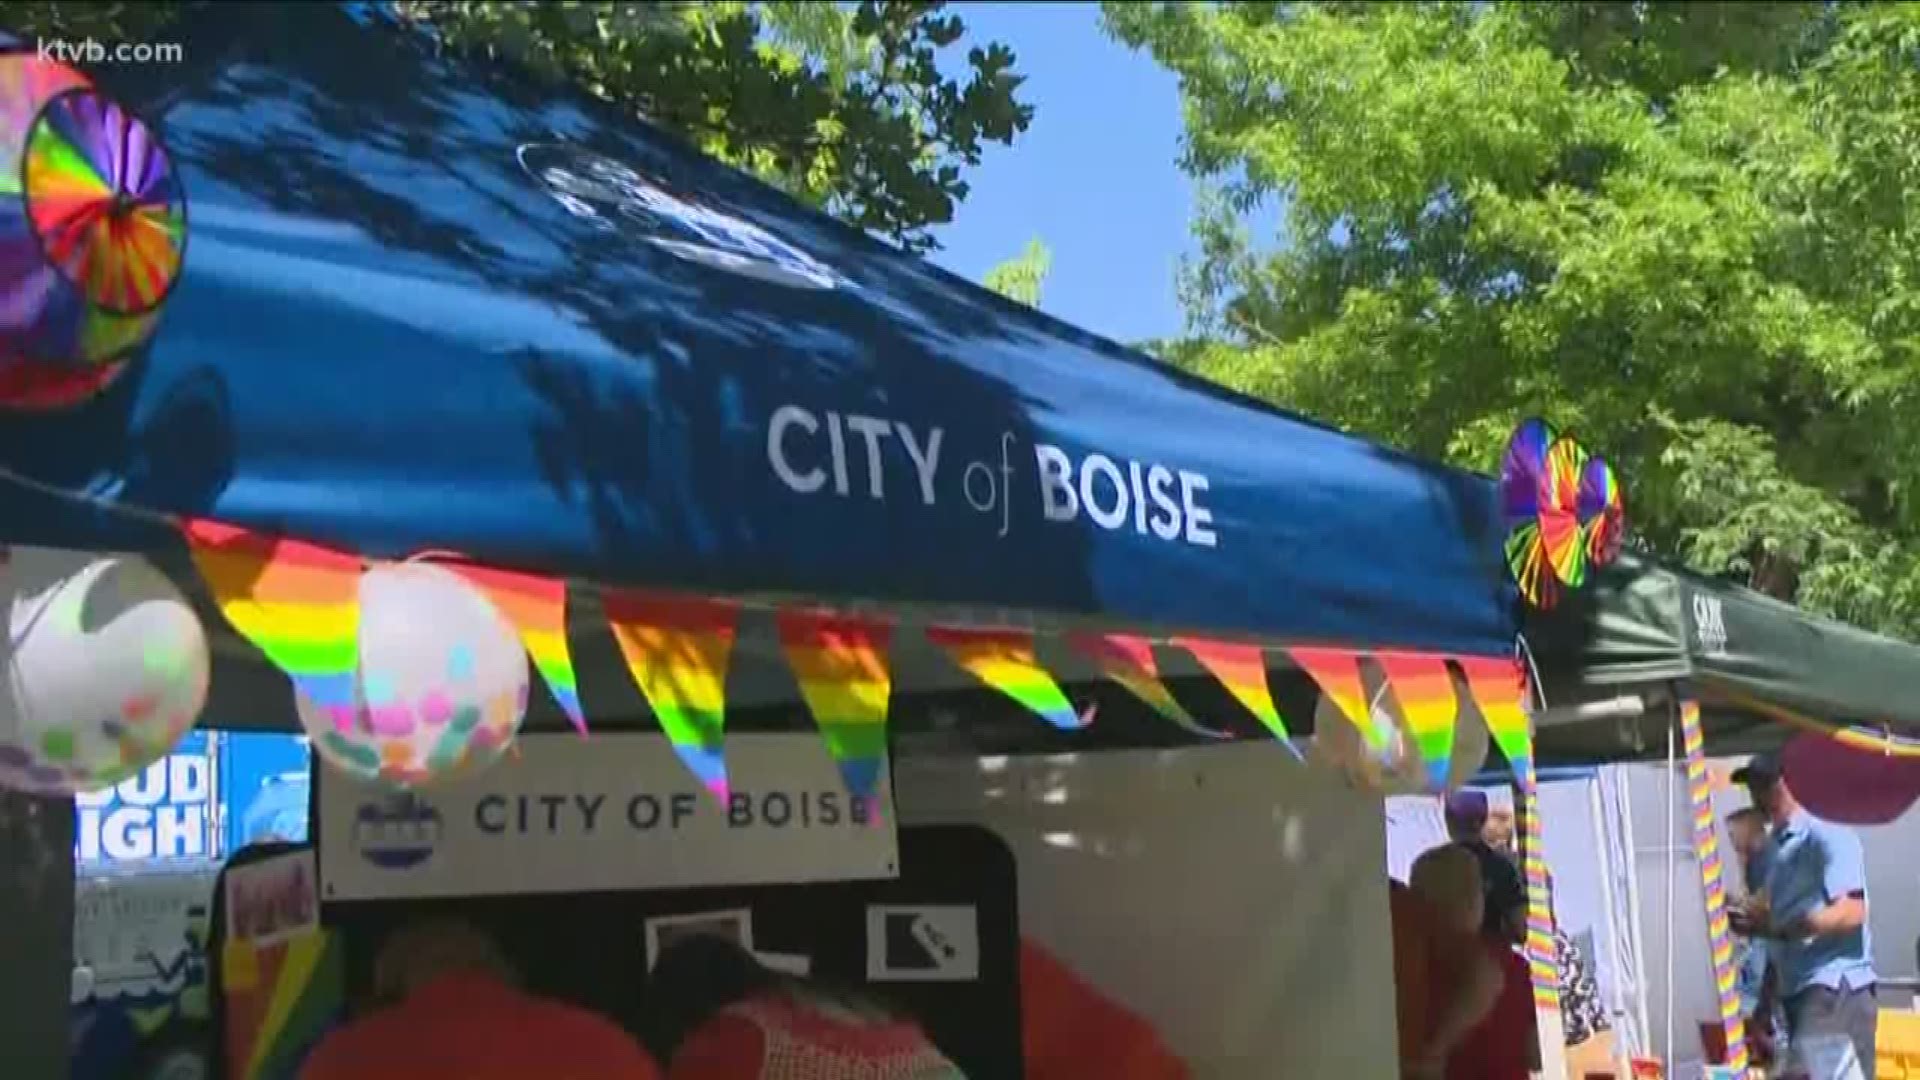 This marks the 30th anniversary of the Pridefest, which has grown from "an informal gathering" in 1989 to a weekend-long celebration featuring a parade and more than two dozen events.